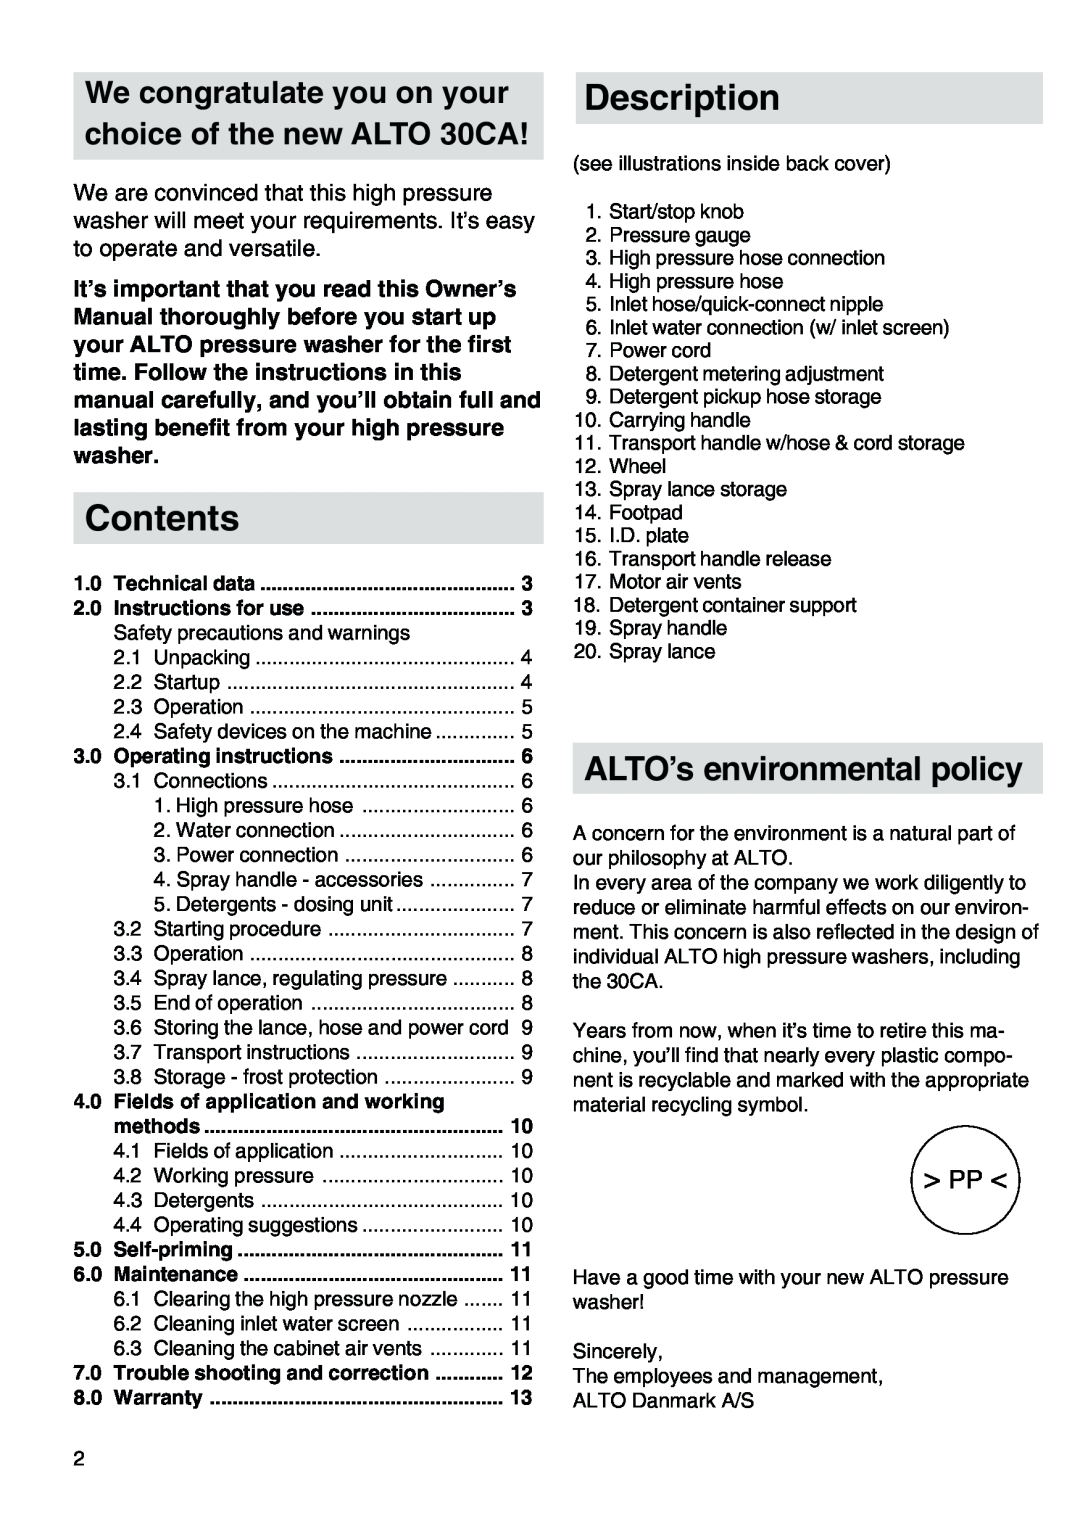 Nilfisk-ALTO 30CA COMPACT I Contents, Description, Fields of application and working, ALTO’s environmental policy 